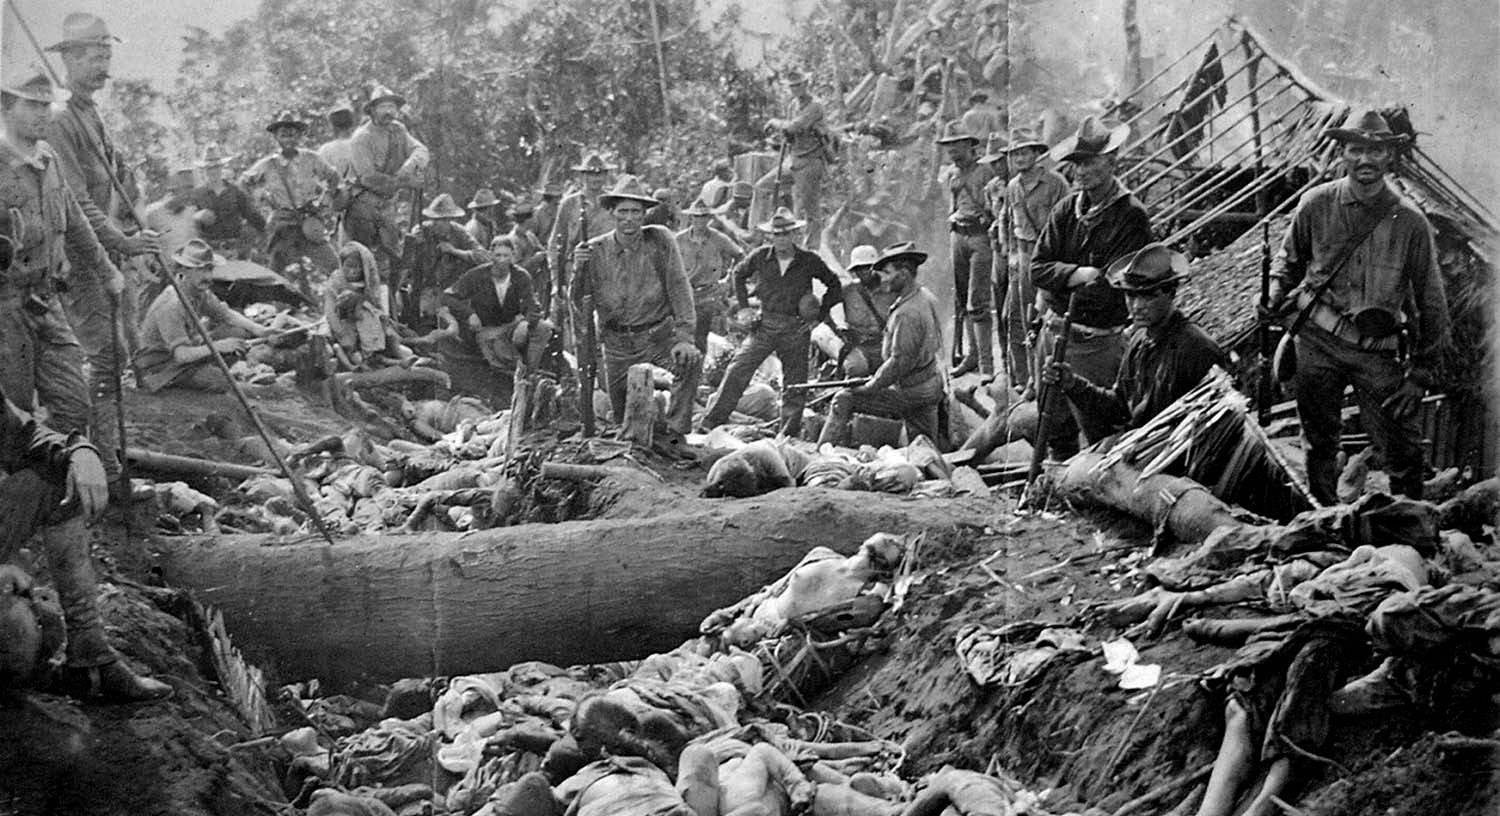 US soldiers pose with the bodies of fallen Moros men, women and children, who resisted US colonial rule in the Philippines. The bodies were piled five deep in the trenches of the crater of an extinct volcano, Bud Dajo, where they had been mowed down by artillery, machine gun and rifle fire from American forces. (Public Domain)